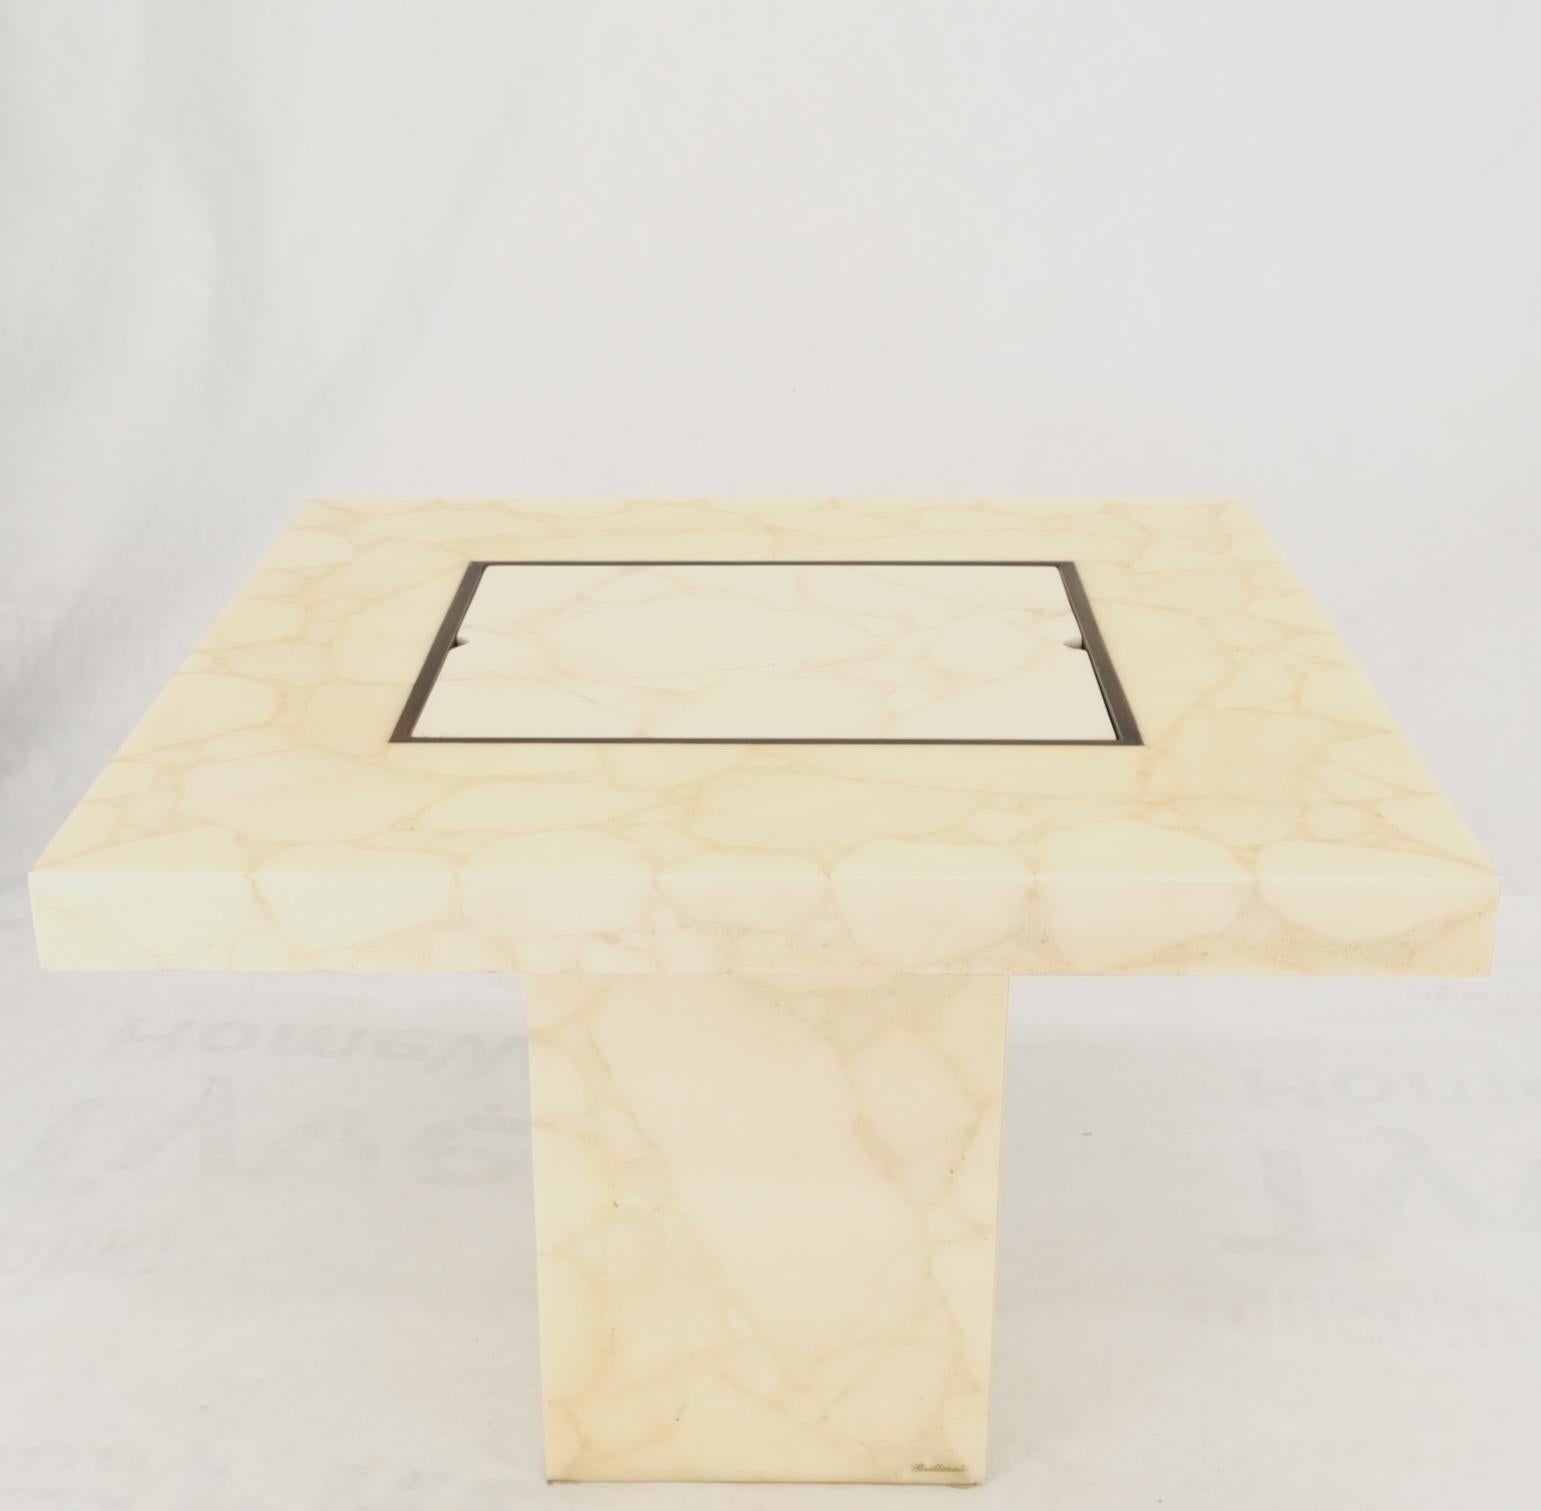 Single Pedestal Base Marble Square Dining Game Table Flip Top Chess Board 8